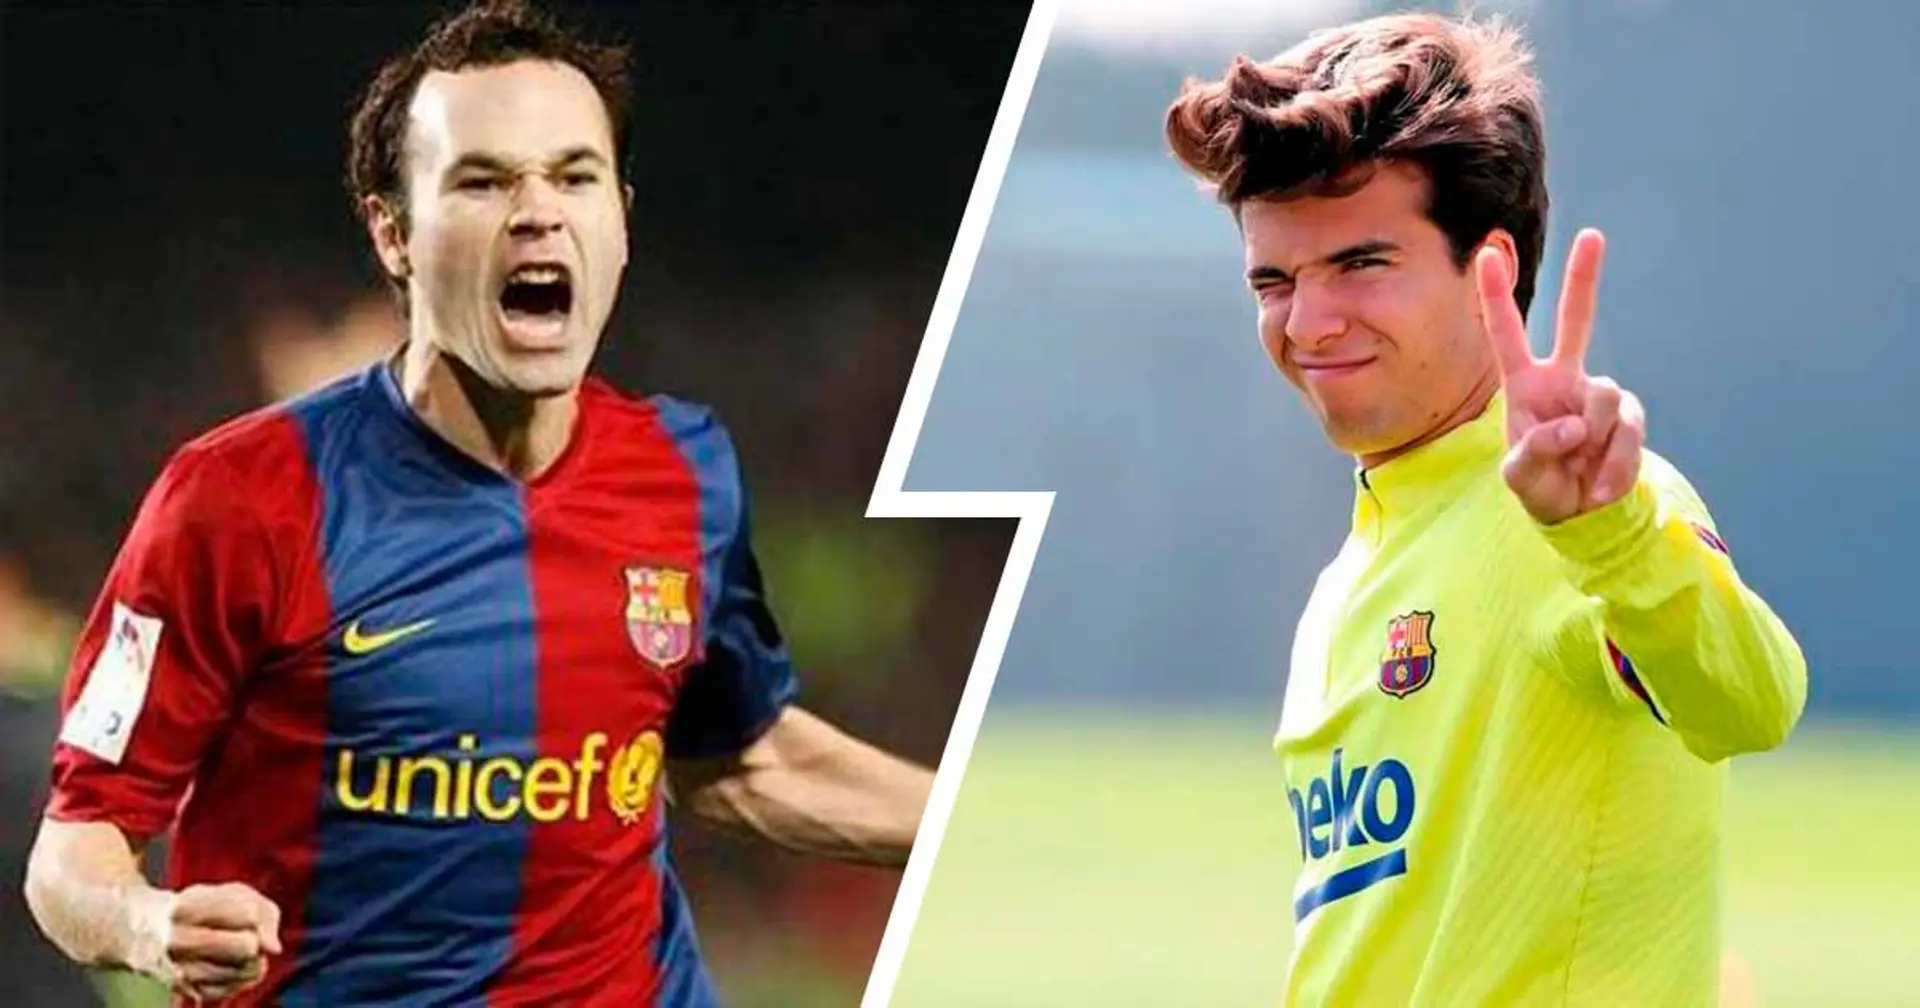 Riqui Puig turns 21 today! Here's what makes birthday boy even more special than Andres Iniesta at his age